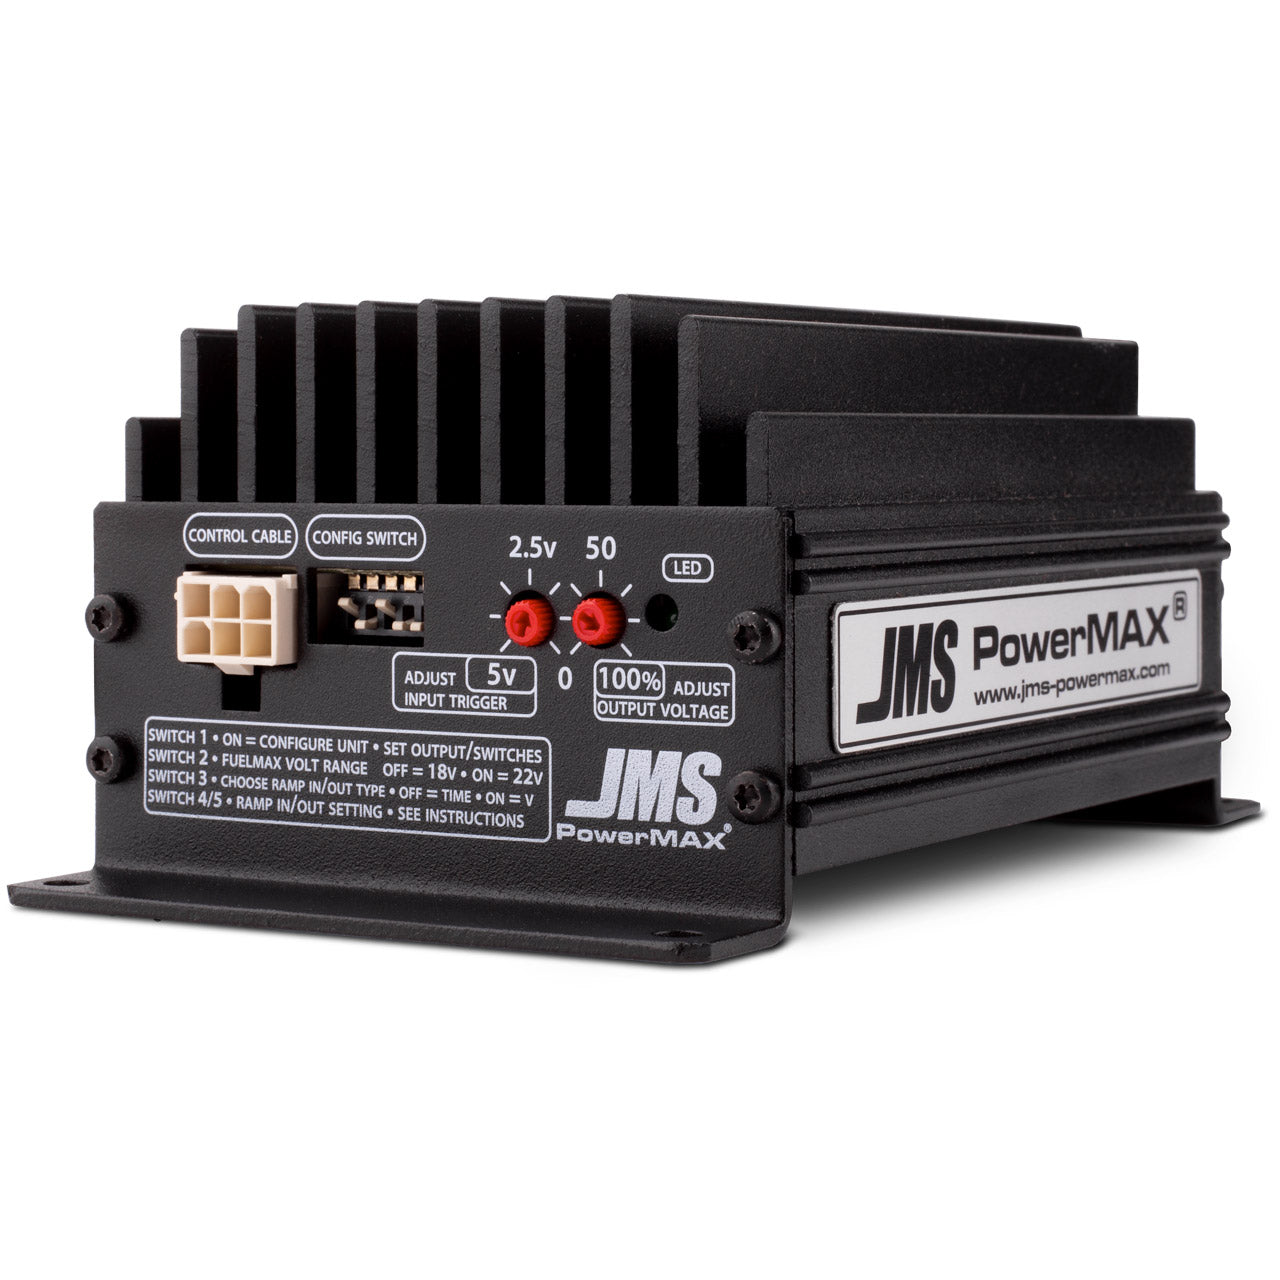 JMS FuelMAX - Fuel Pump Voltage Booster V2 - Plug and Play Single Output (Activation - MAF/MAP/TPS or Ground includes Ext pressure switch) P2000PPT09